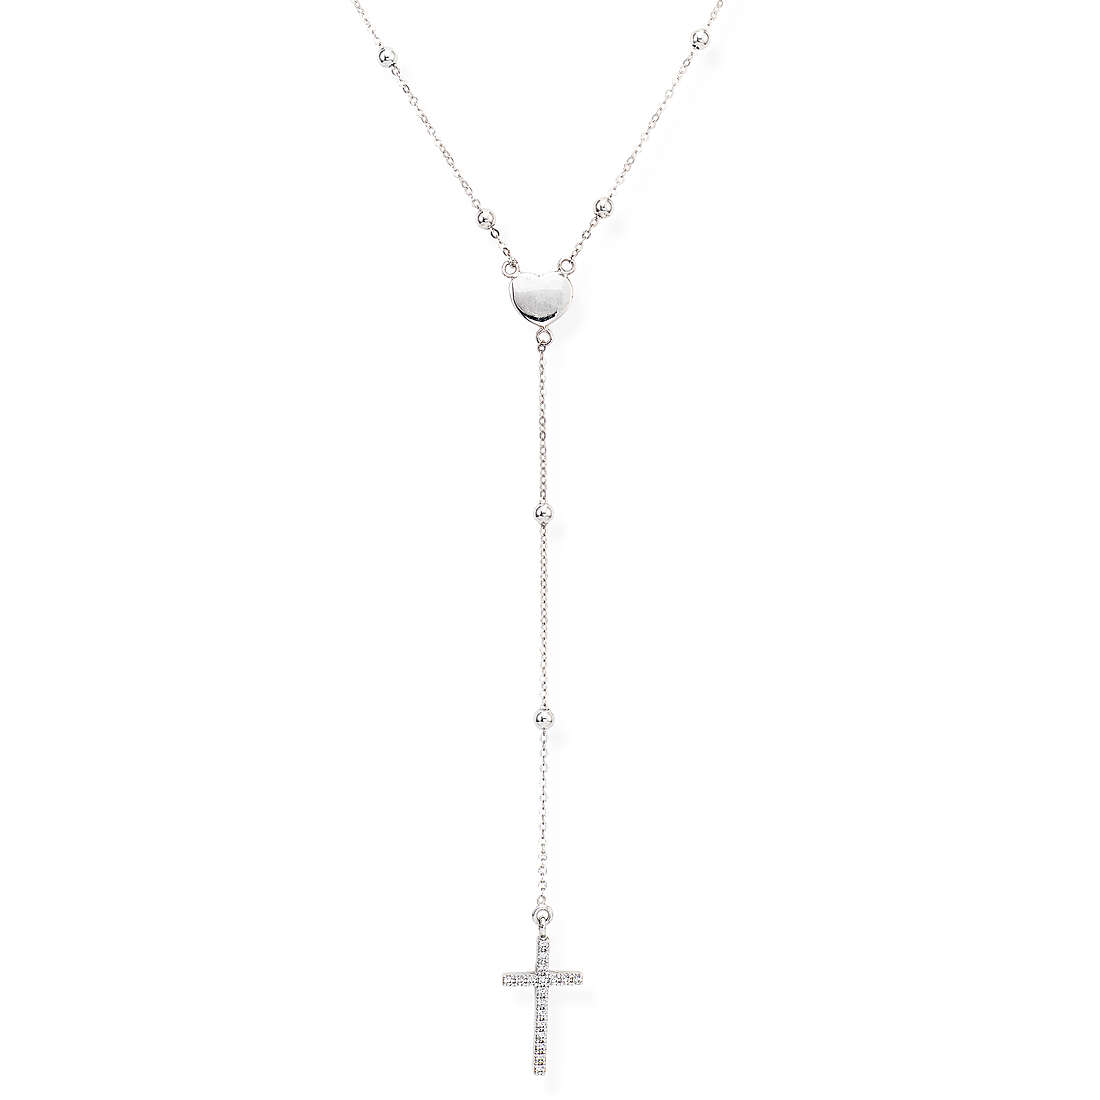 necklace woman jewel Amen with crucifix CLHCRZB